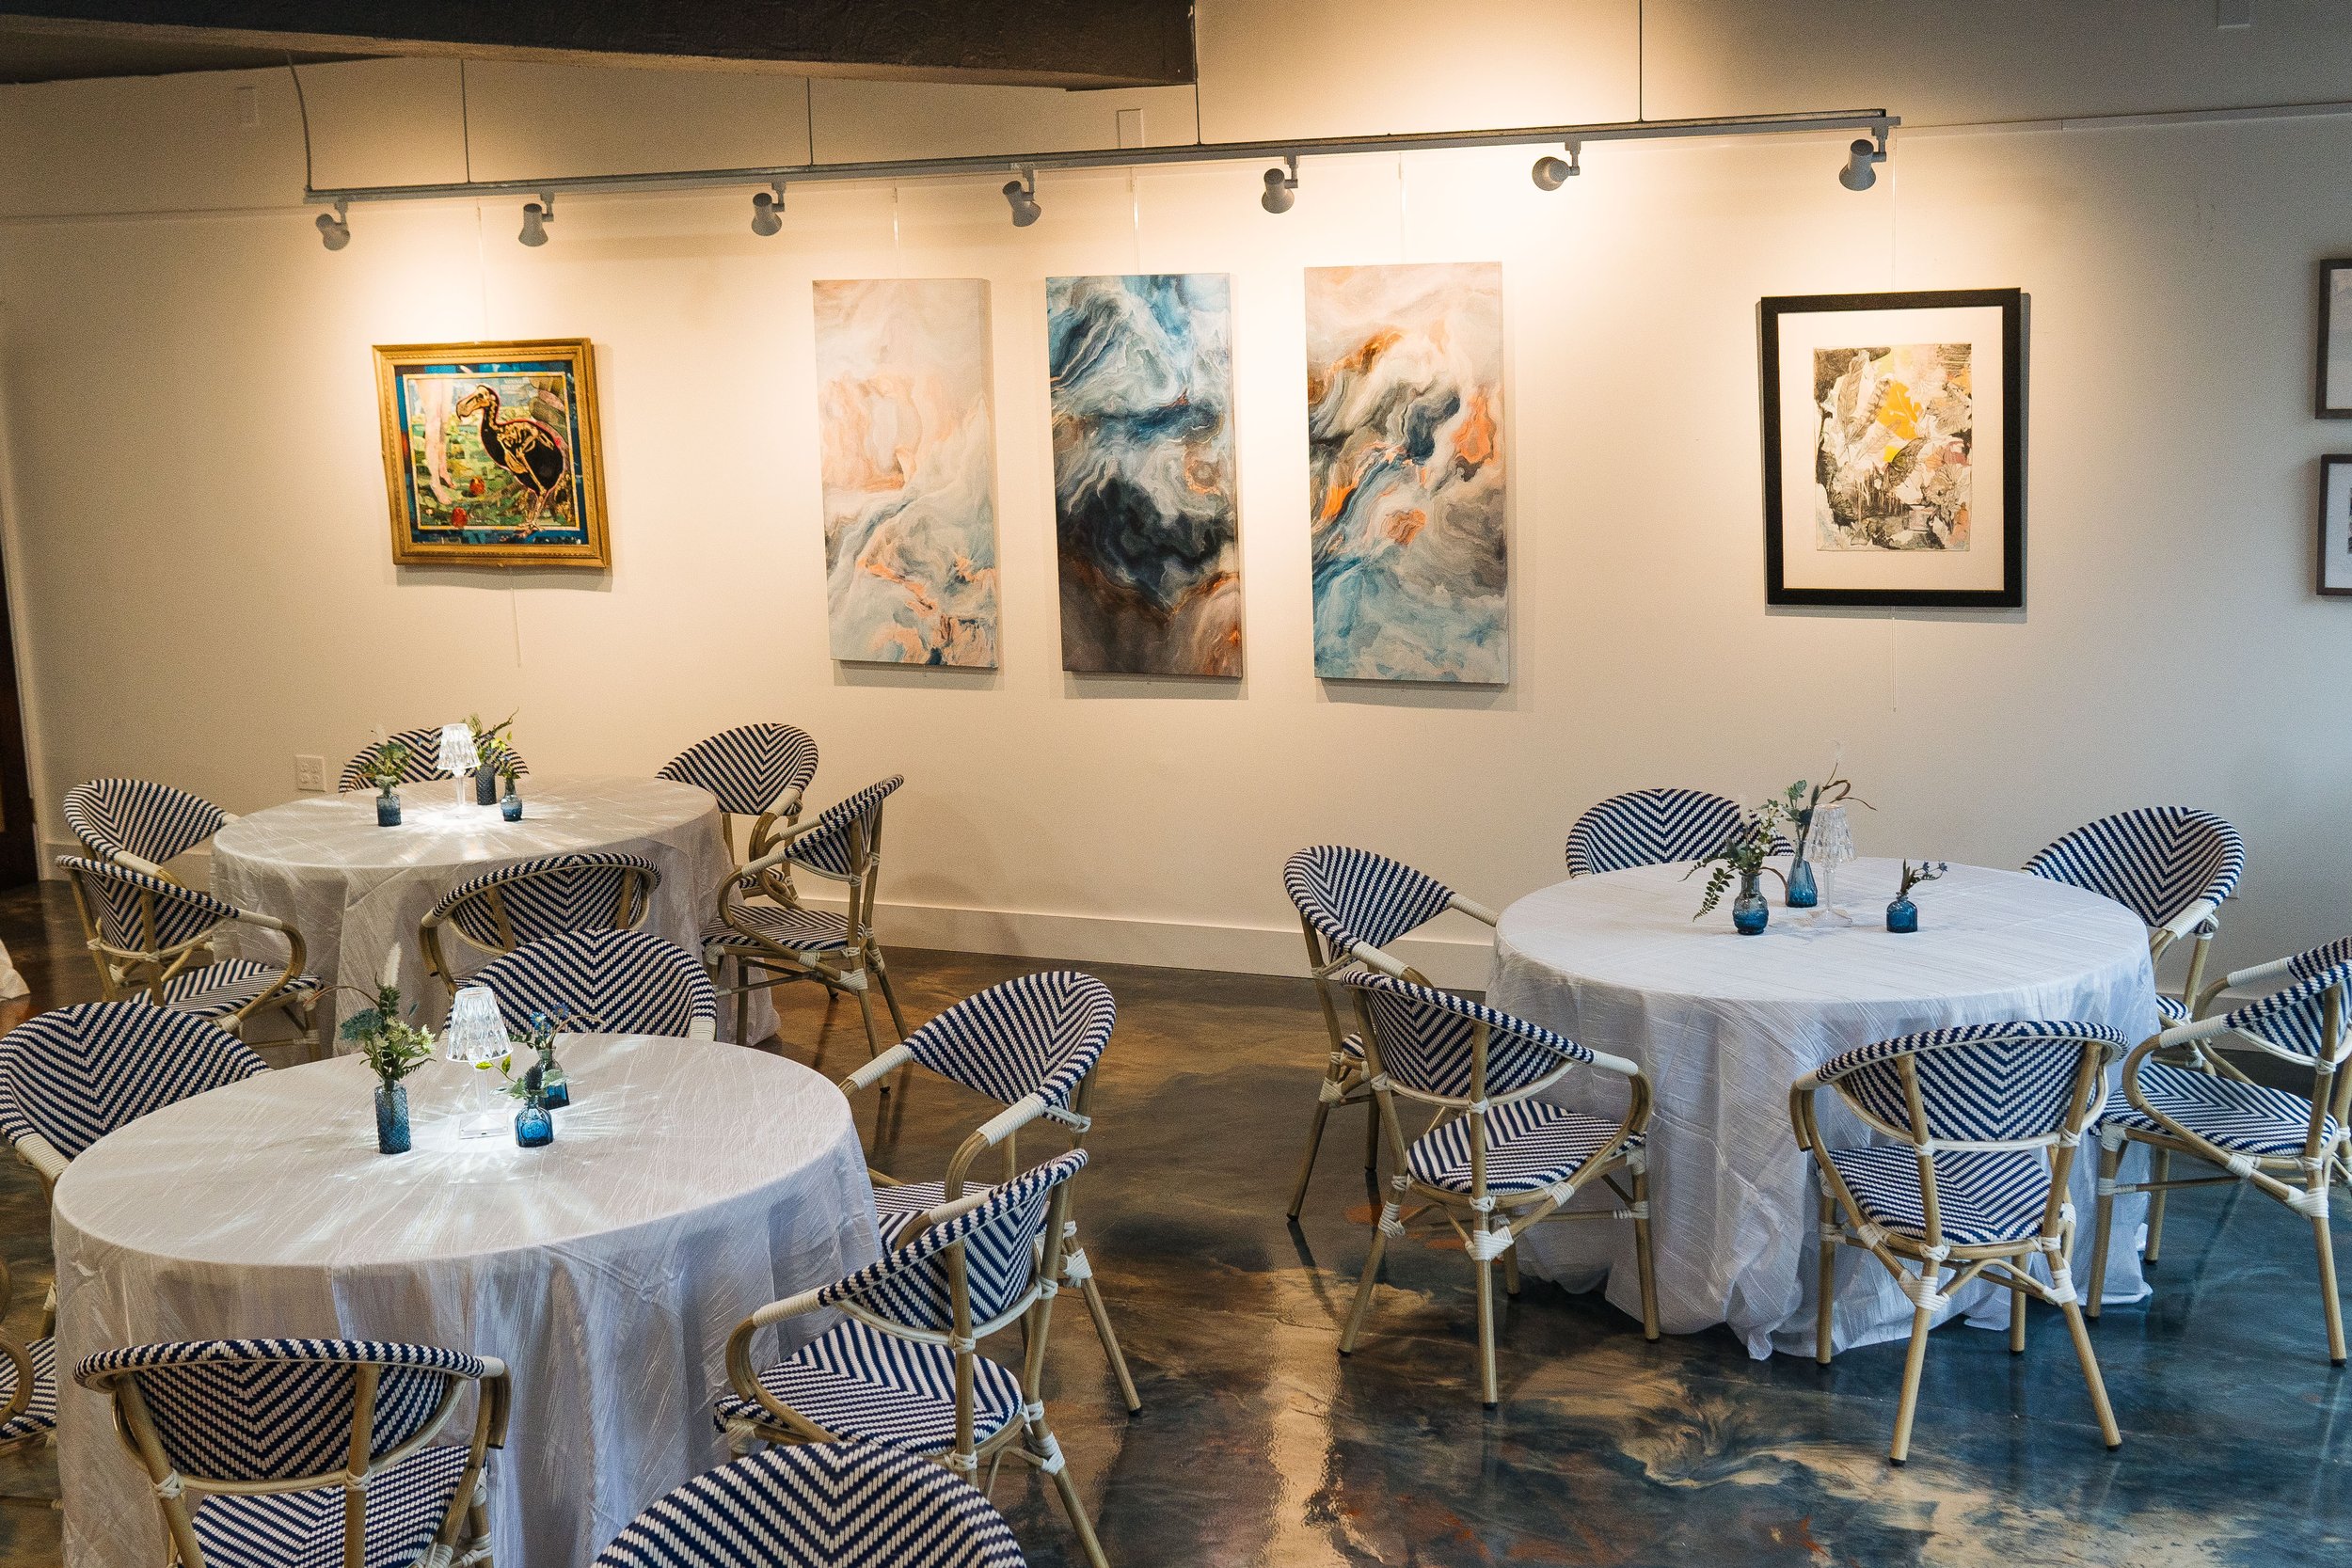 Showcased swirling artwork on walls with dining tables